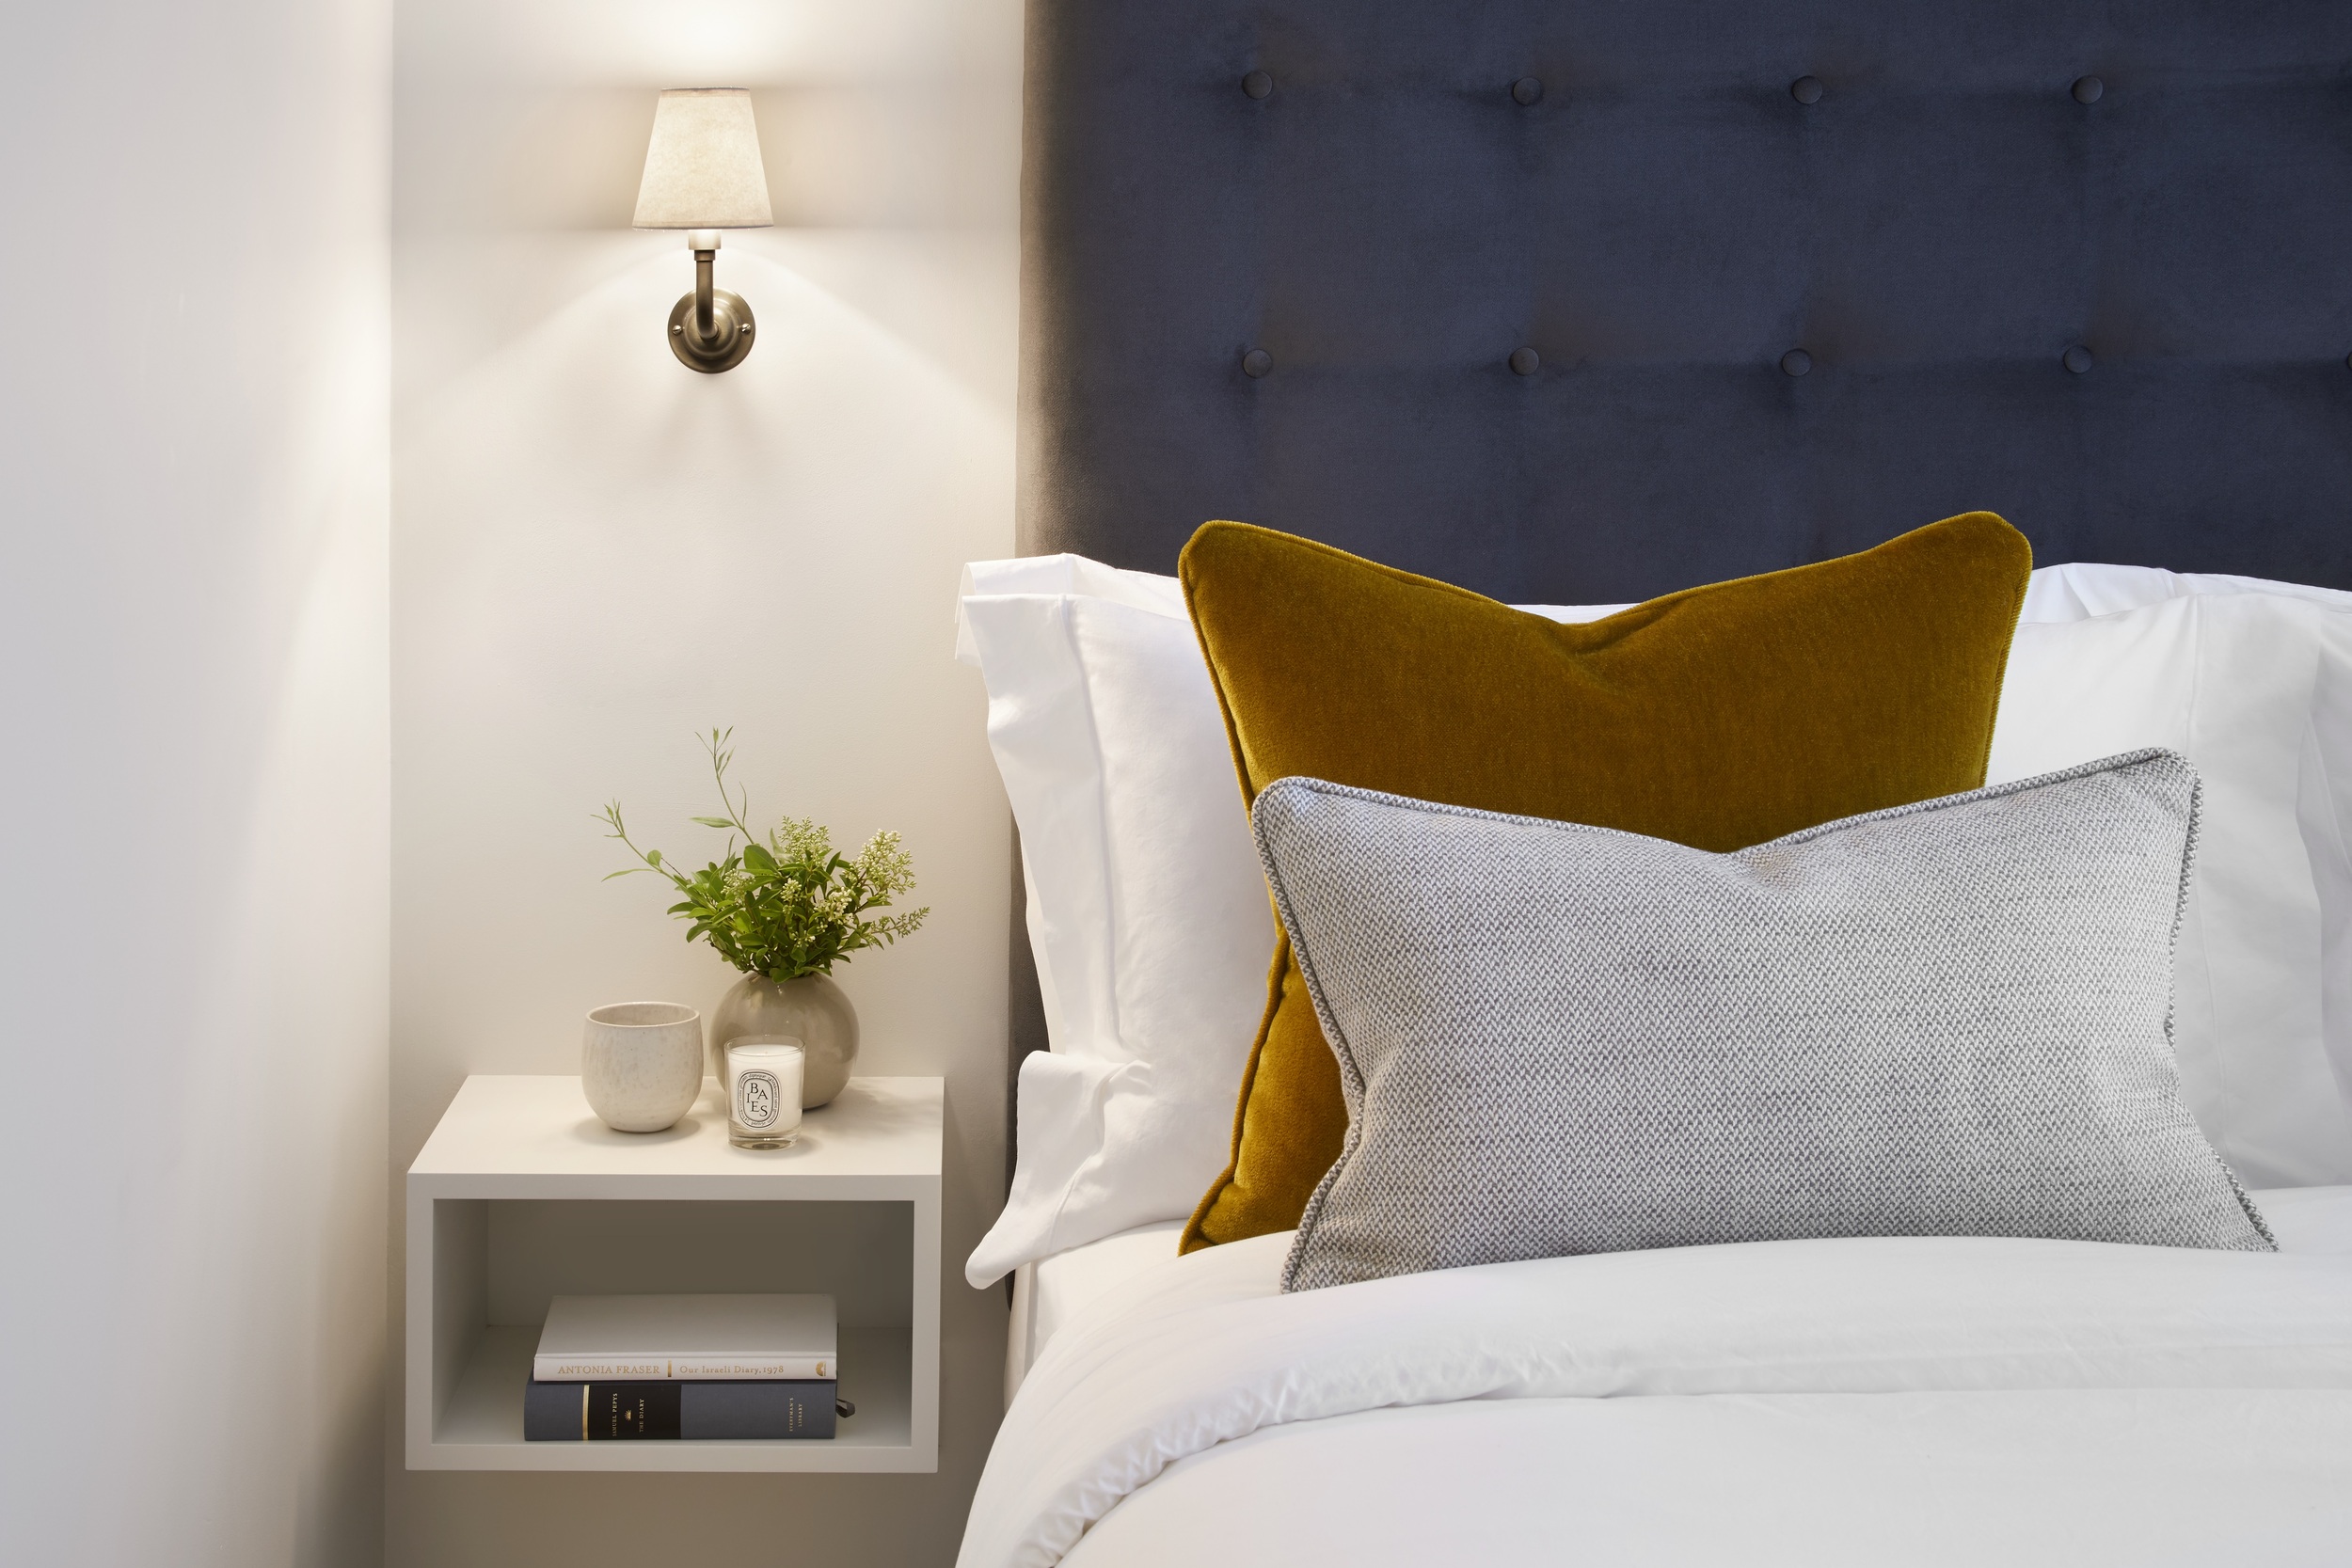 Contrasting cushions create welcoming bedroom